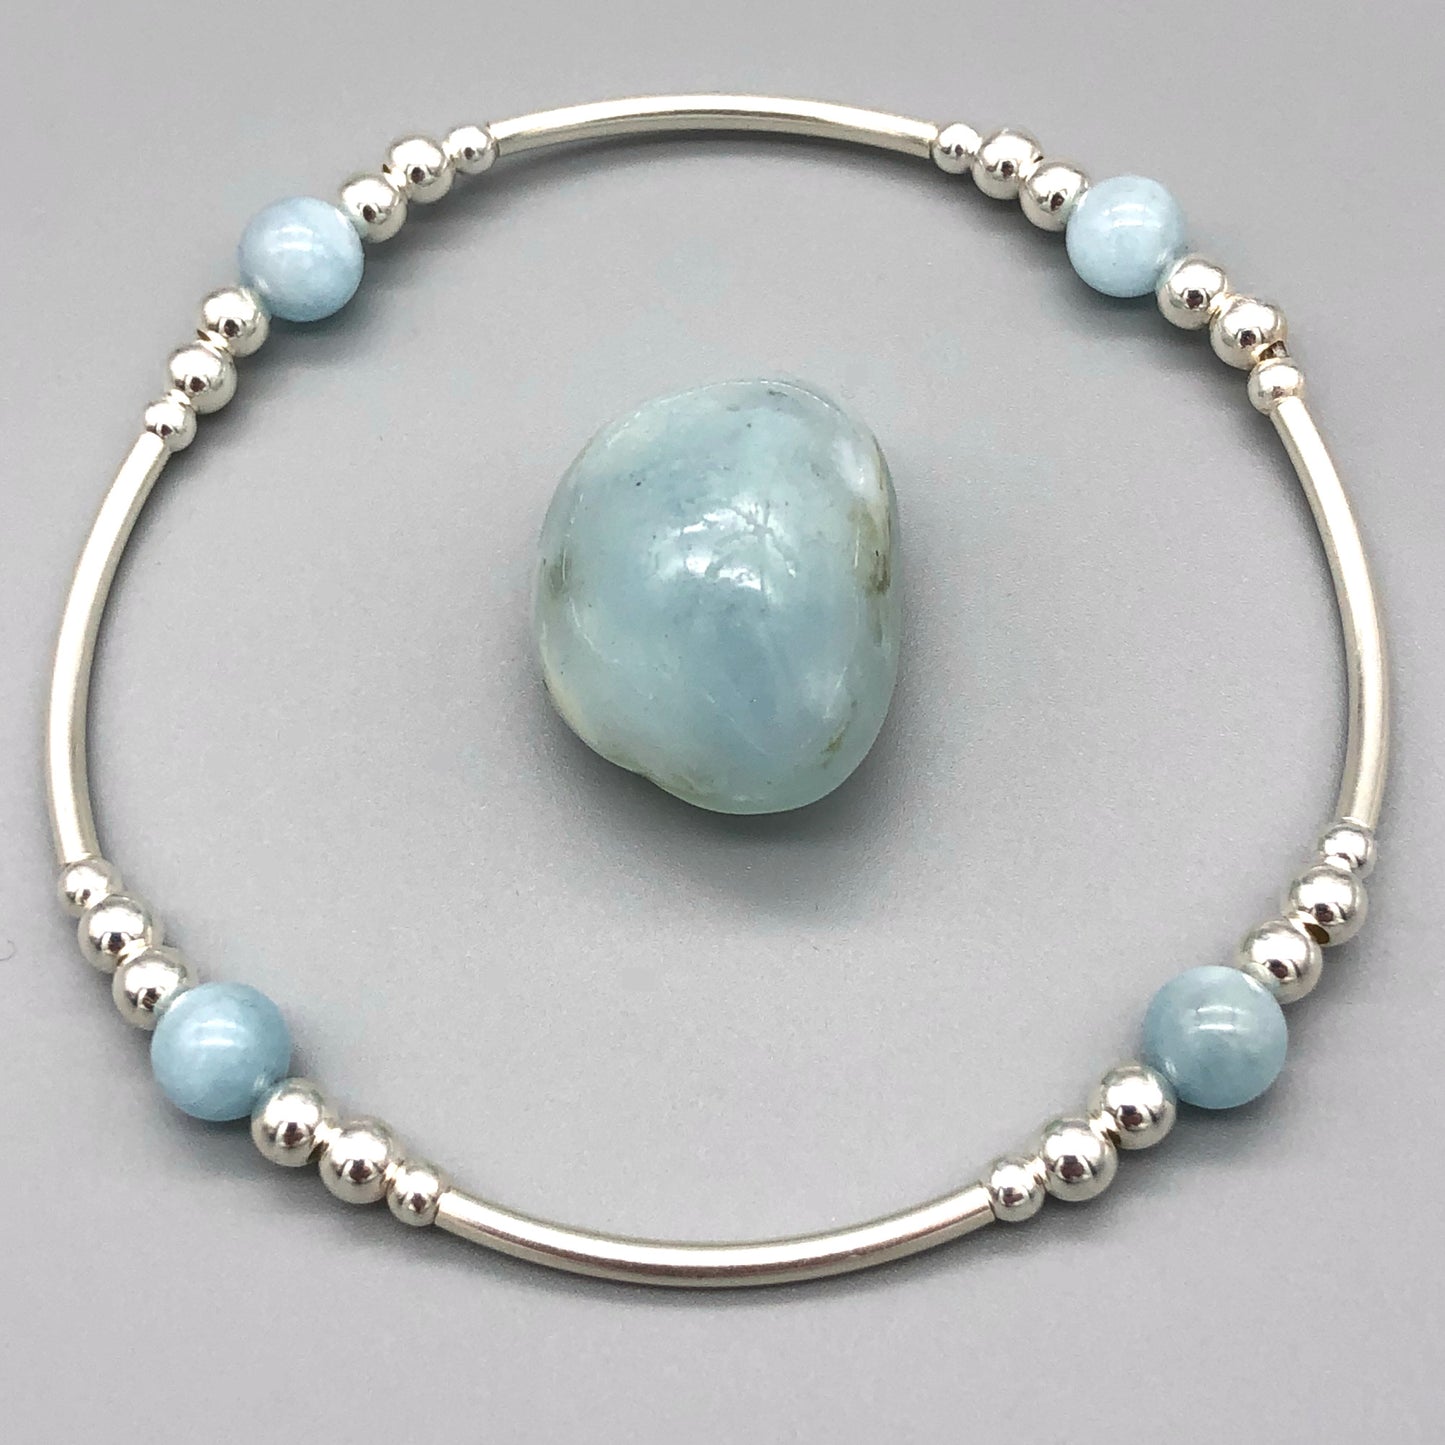 Aquamarine healing crystal & sterling silver women's stacking bracelet by My Silver Wish